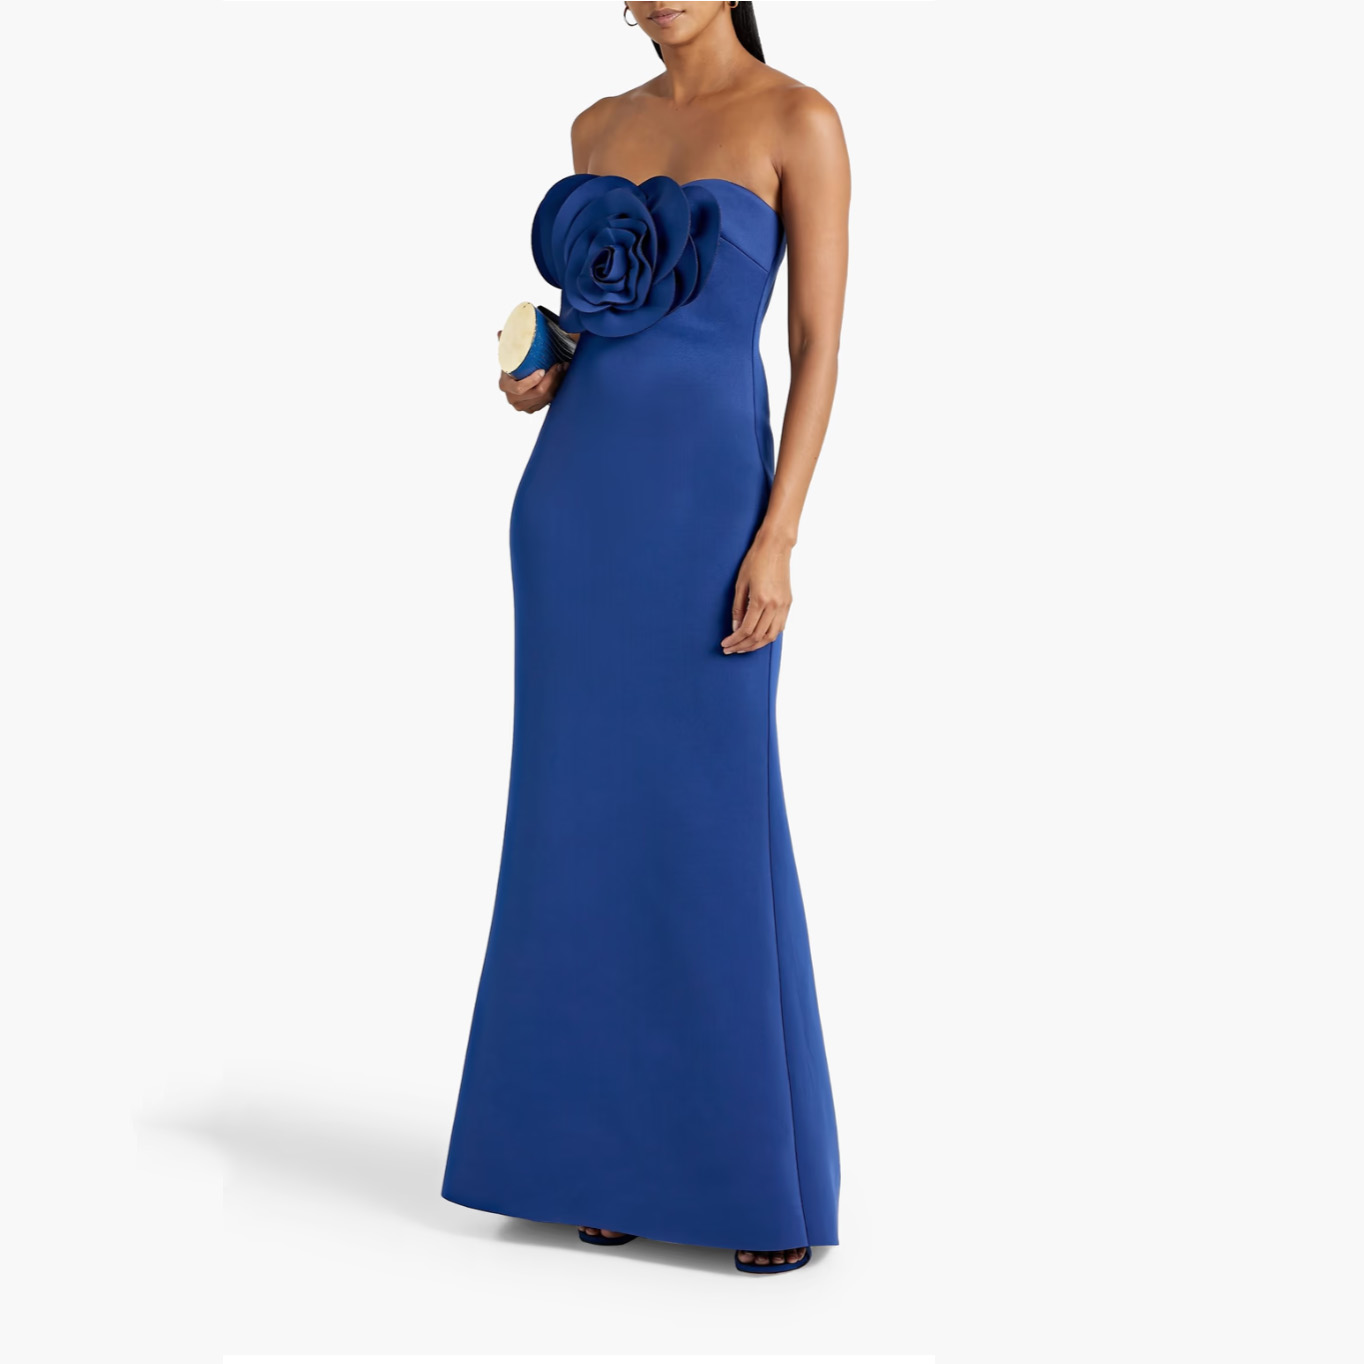 Strapless Rosette A-line Gown in blue